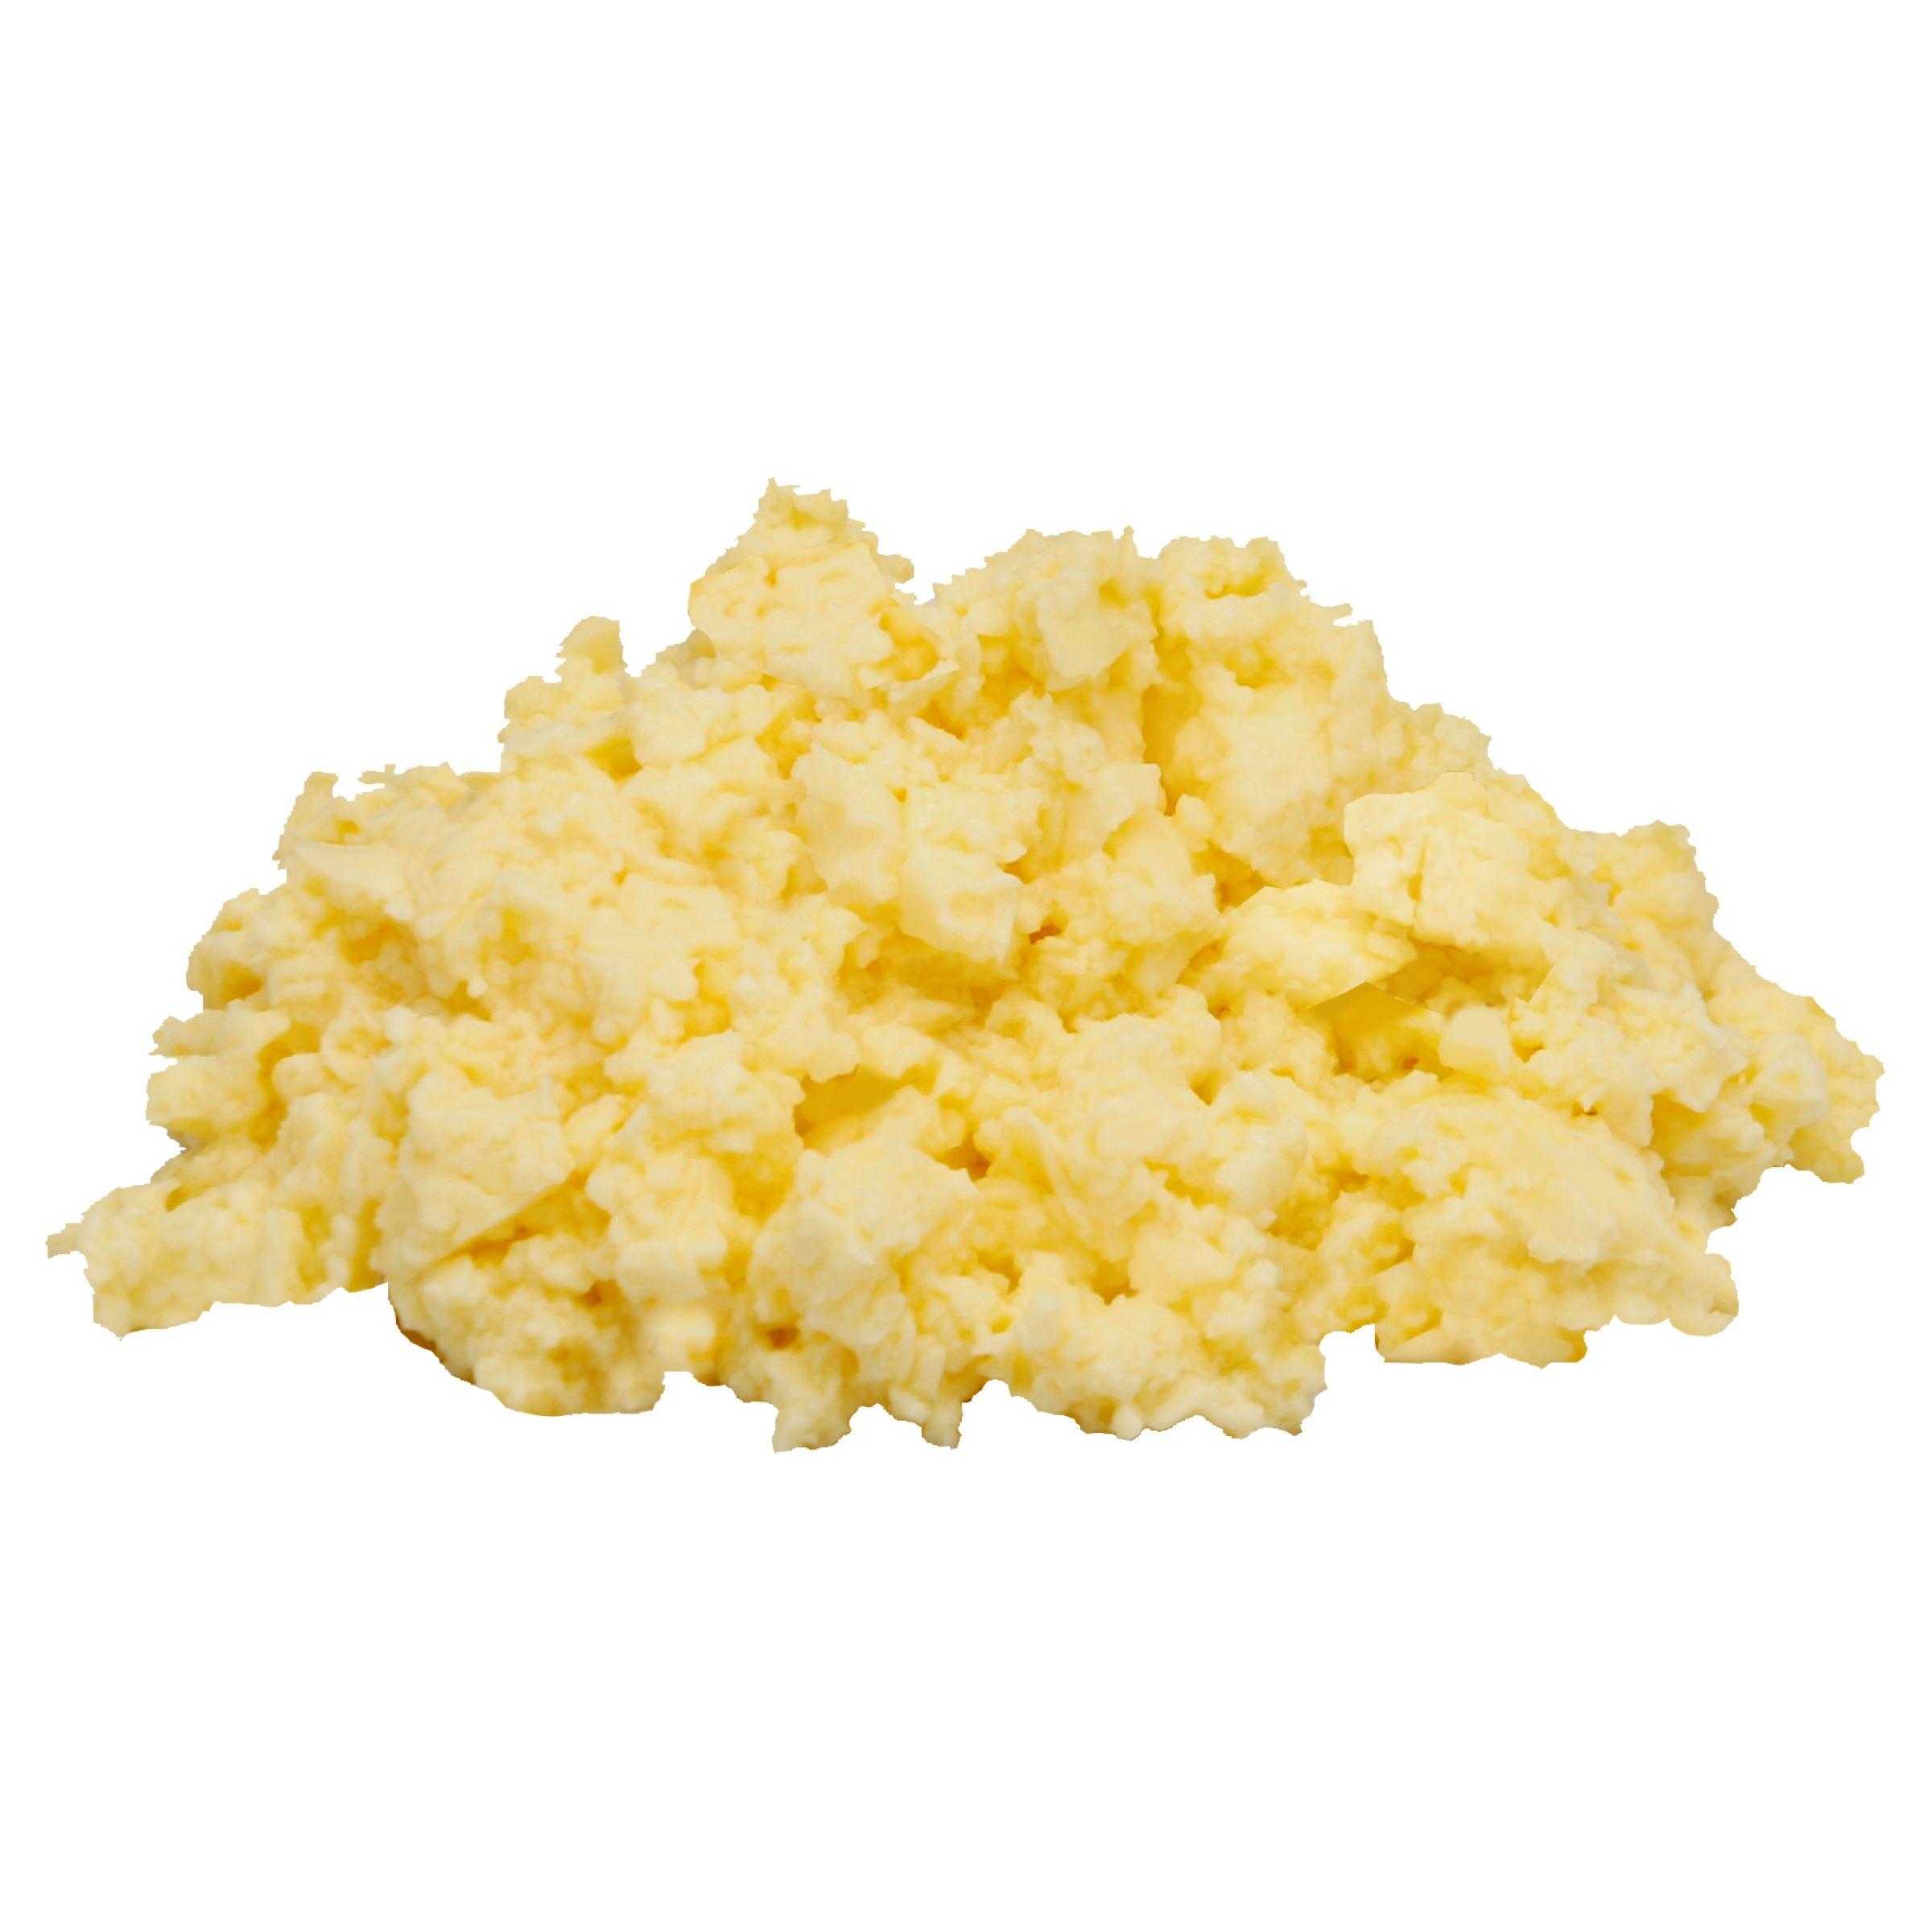 Papetti’s® Fully-Cooked Refrigerated Scrambled Eggs with Natural Butter Flavor, 12/1.85 Lb Bags